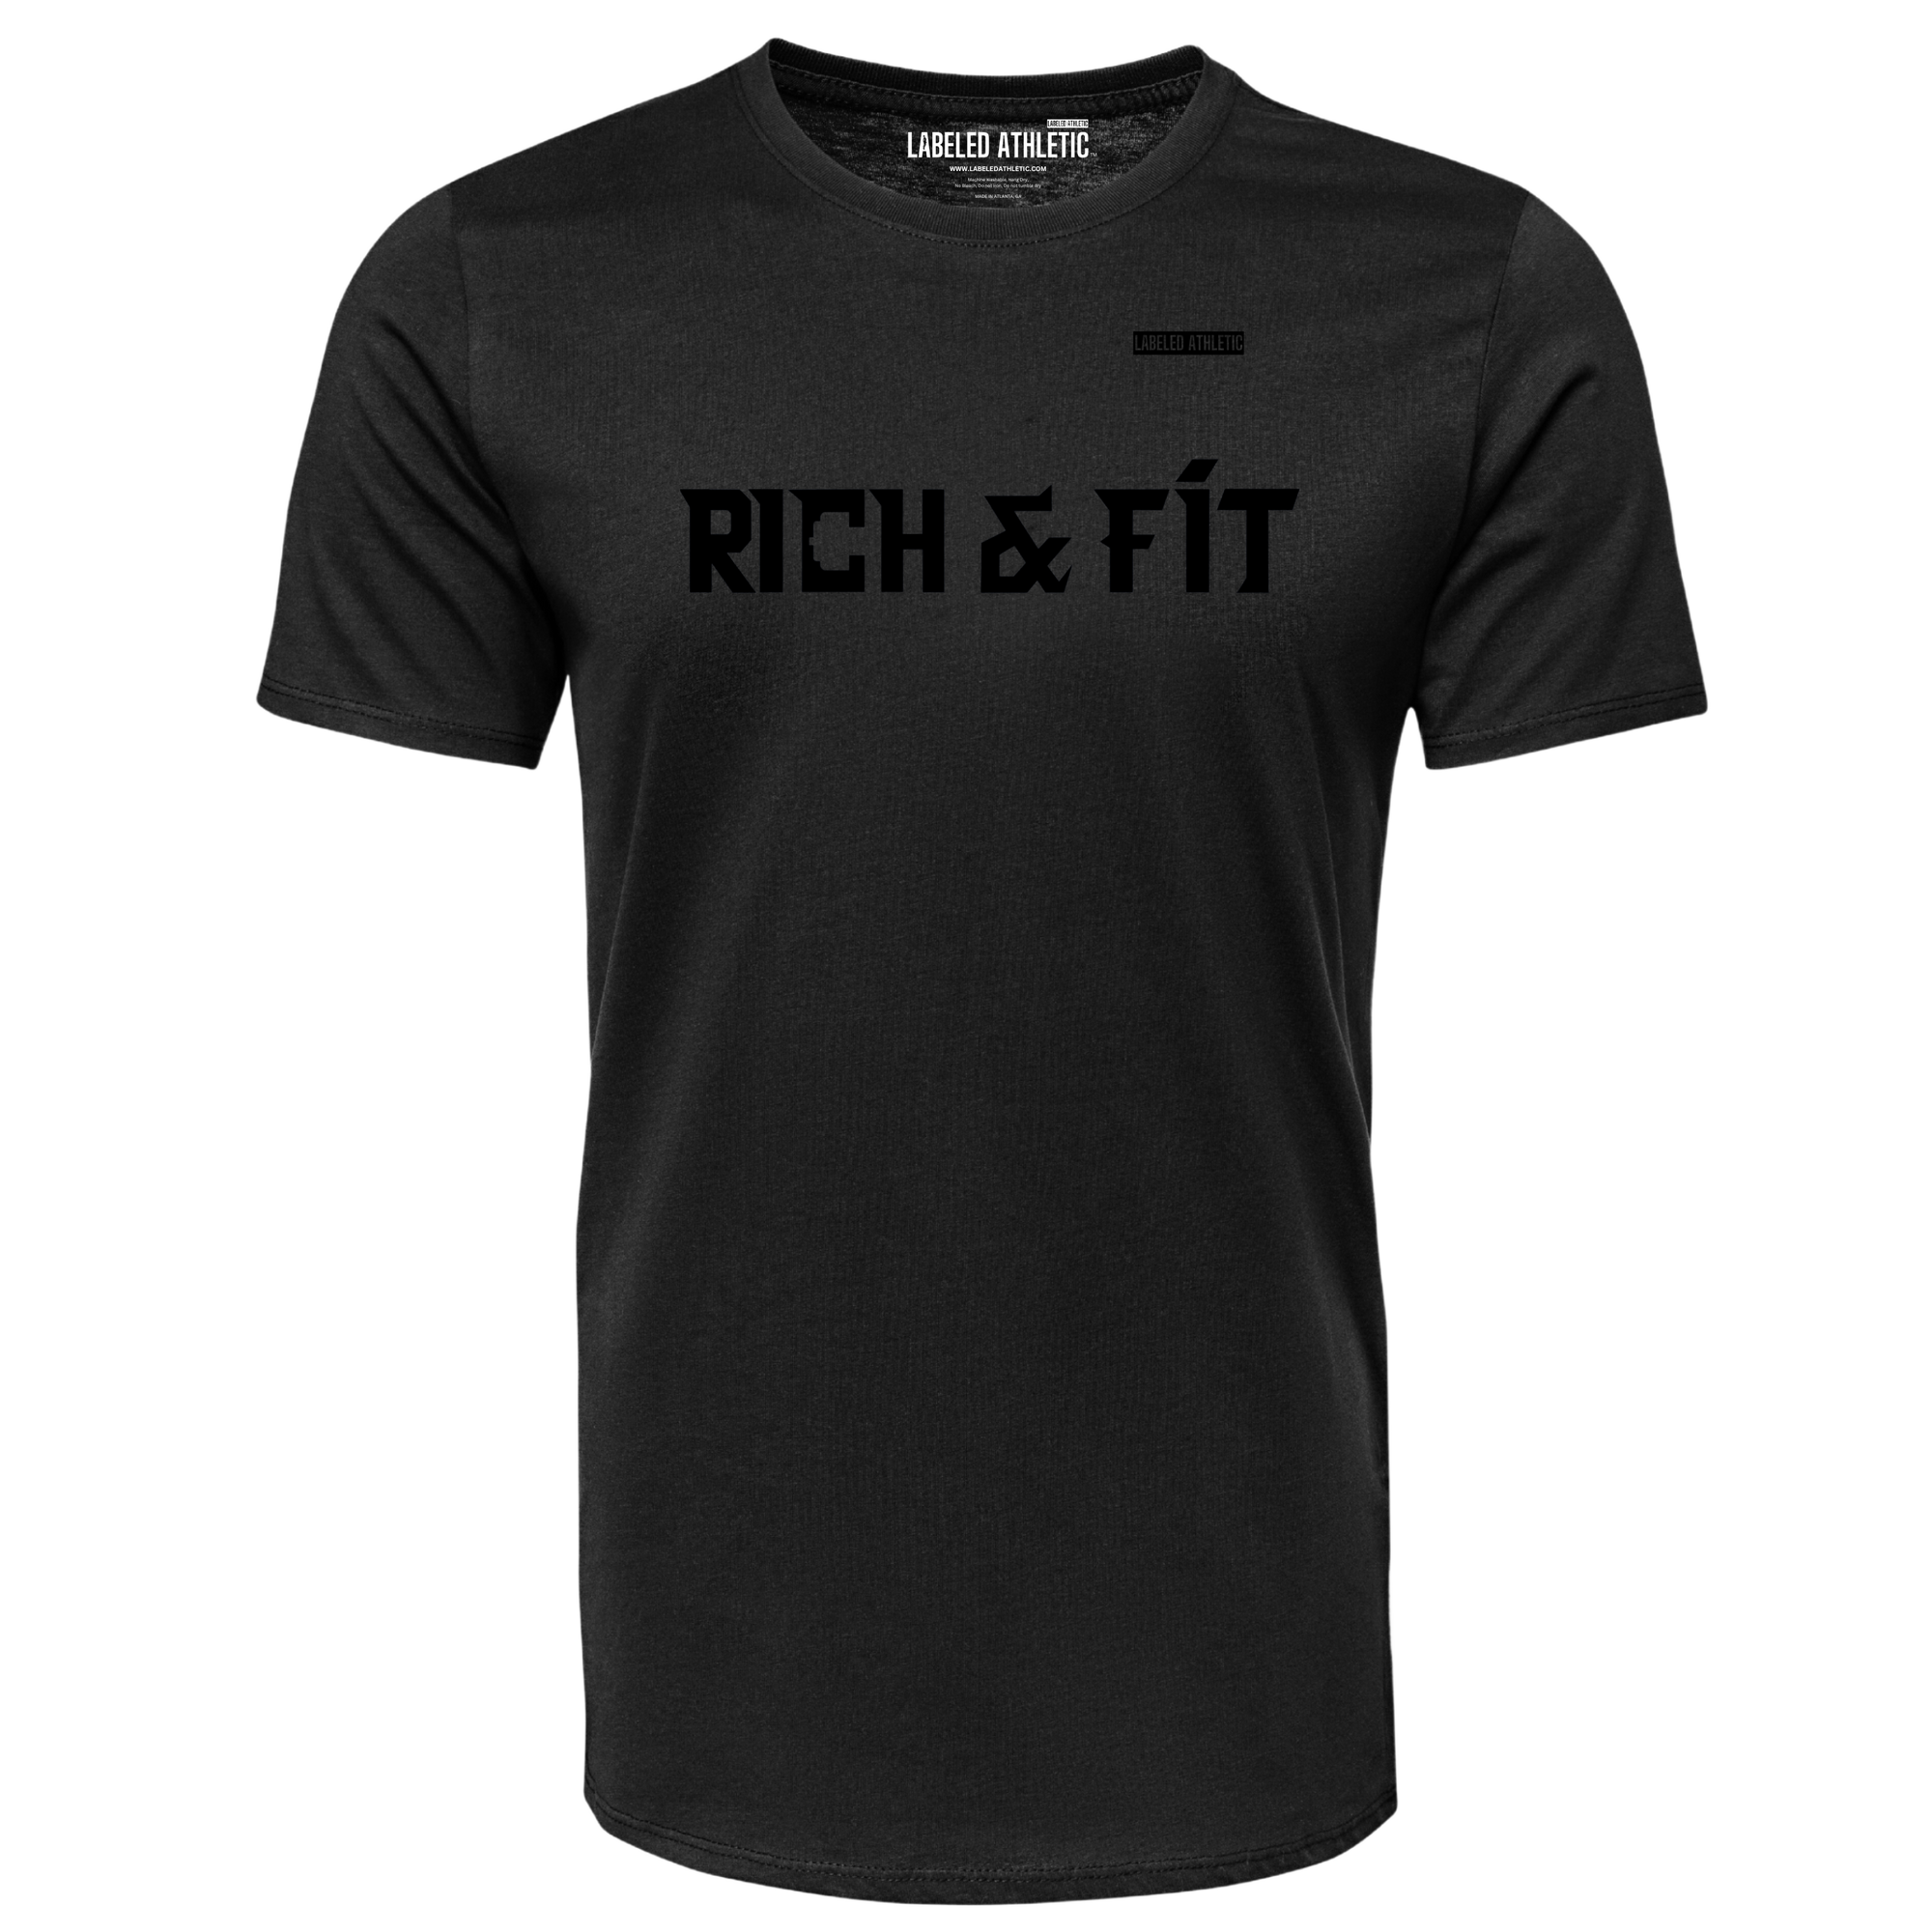 Copy of RICH & FIT - LABELED ATHLETIC T-SHIRT | BLACK/BLACK